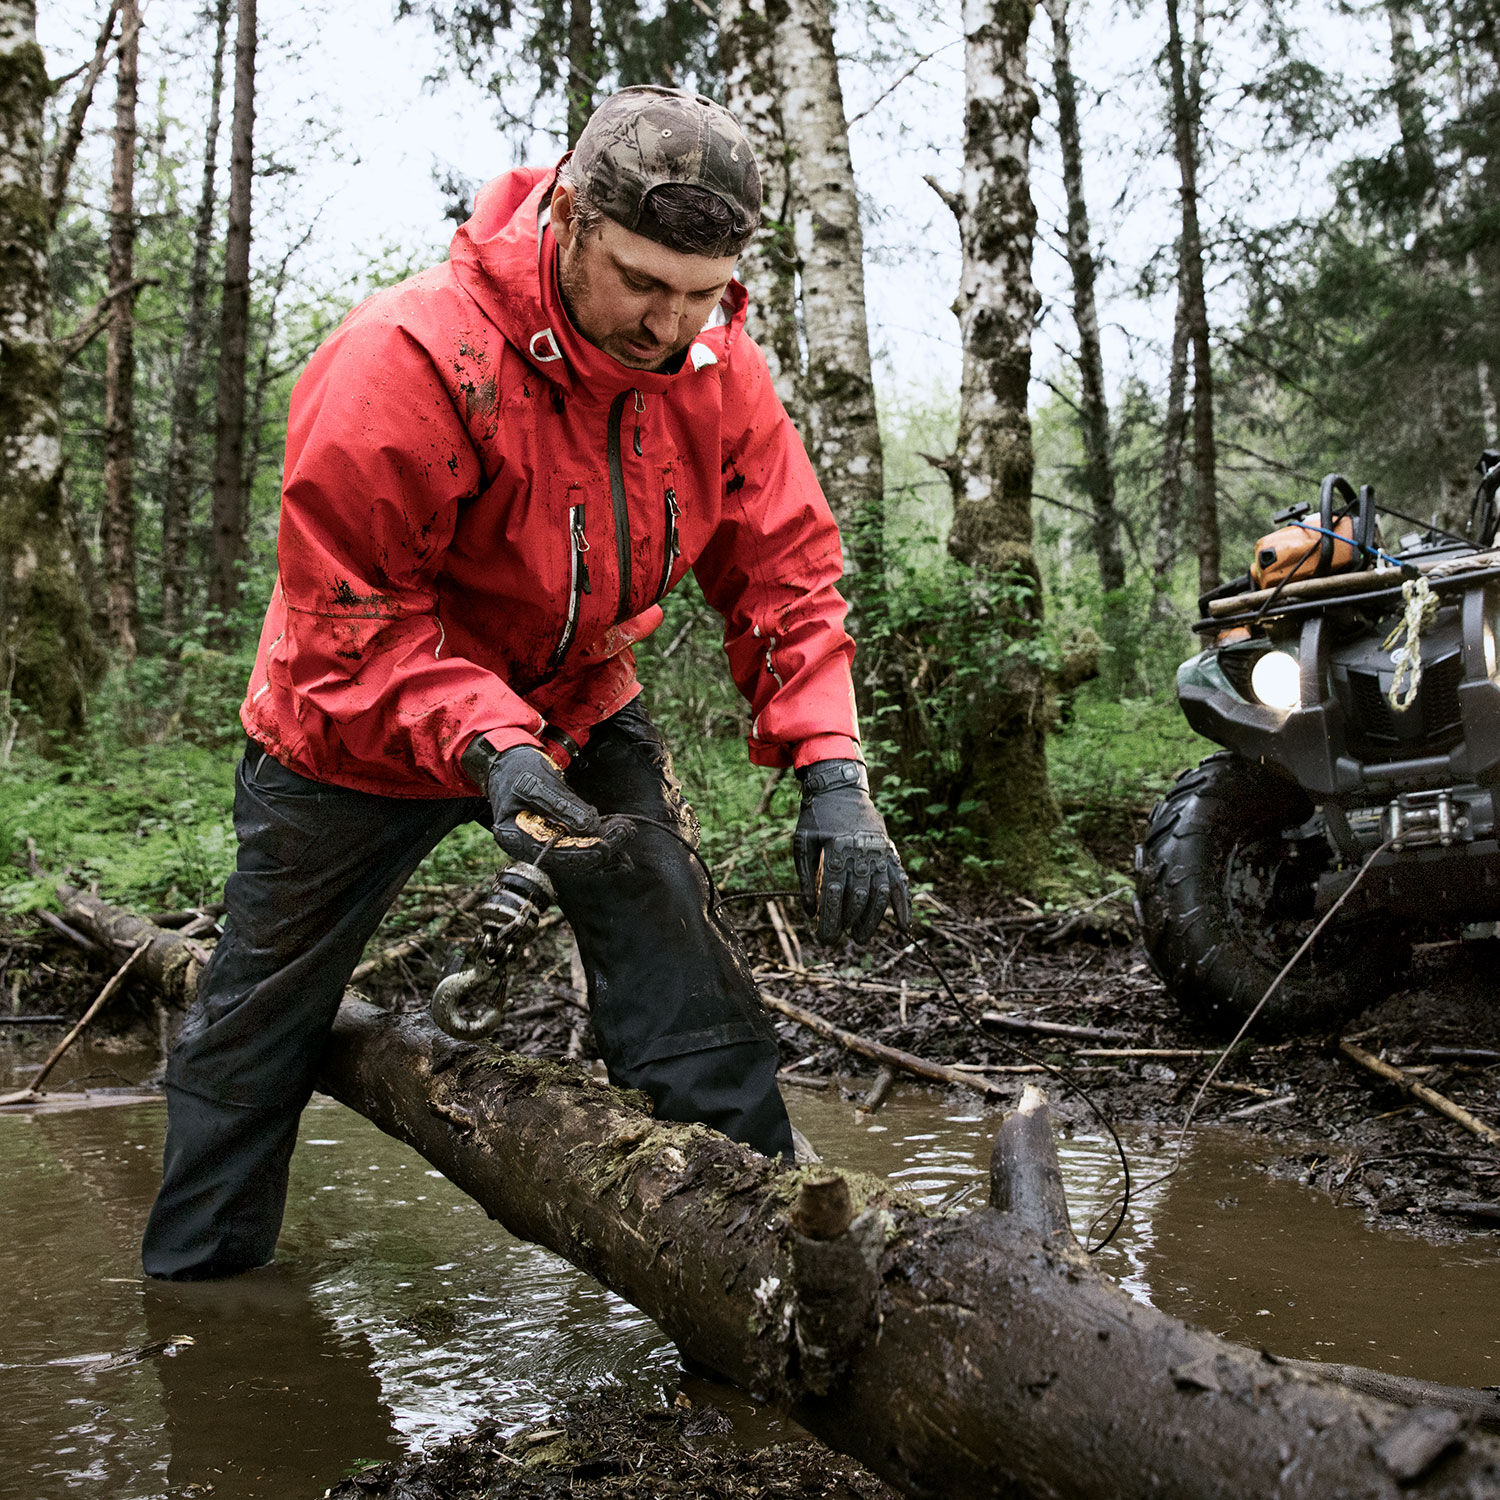 A Beginner's Guide To ATV Riding ：What To Wear - XYZCTEM®